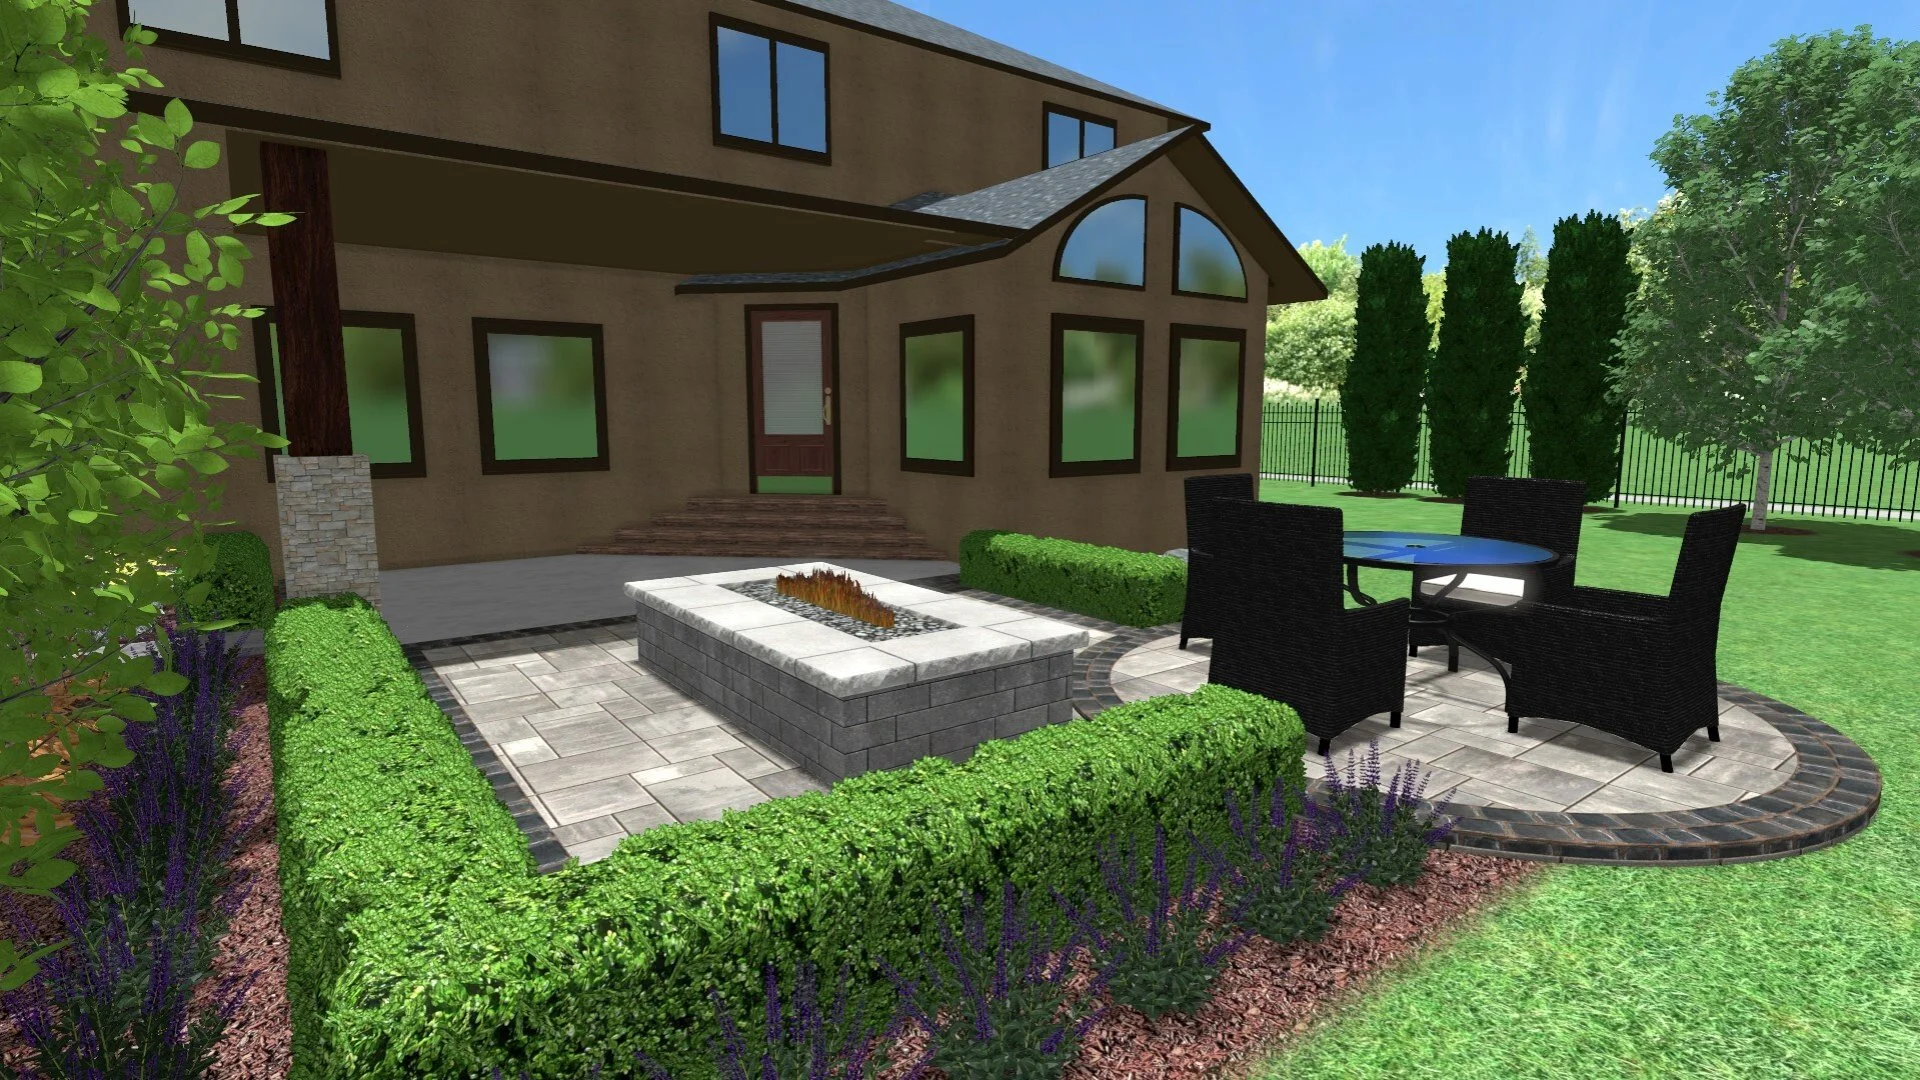 Take Advantage of a Design Rendering for Your Next Landscape Project!